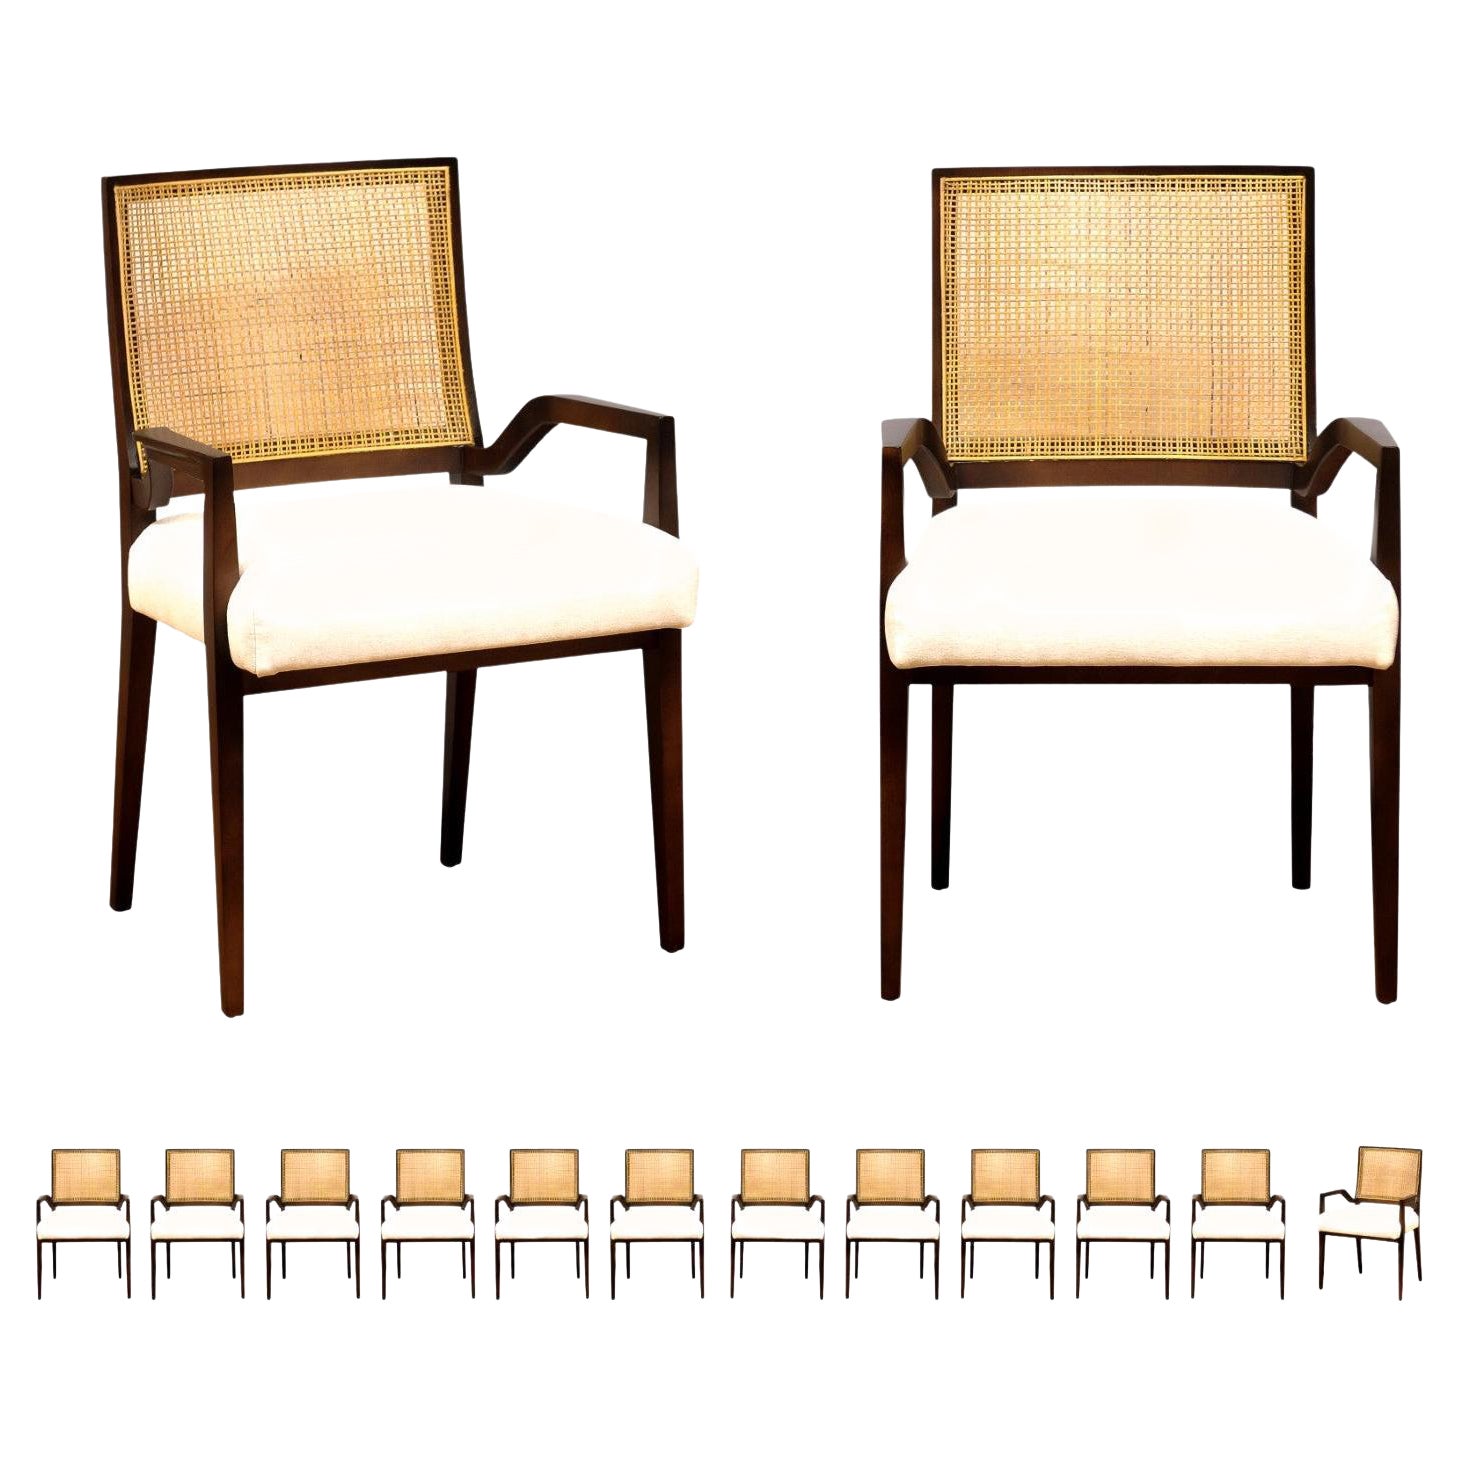 All Arms, Unrivaled Set of 12 Cane Dining Chairs by Michael Taylor, circa 1960